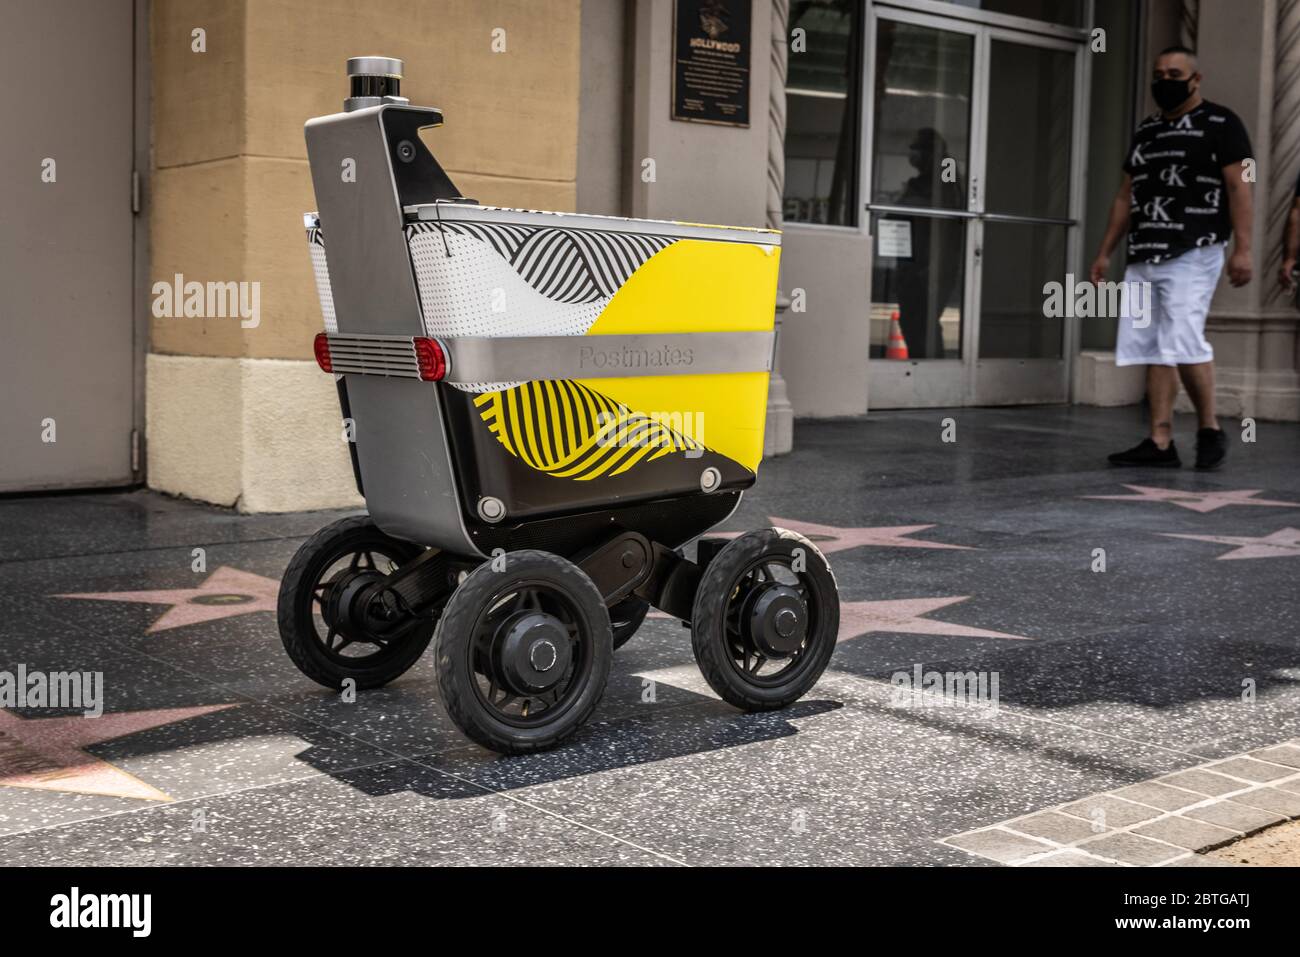 Postmates delivery robot in action on Hollywood Boulevard in Los Angeles, California. Stock Photo